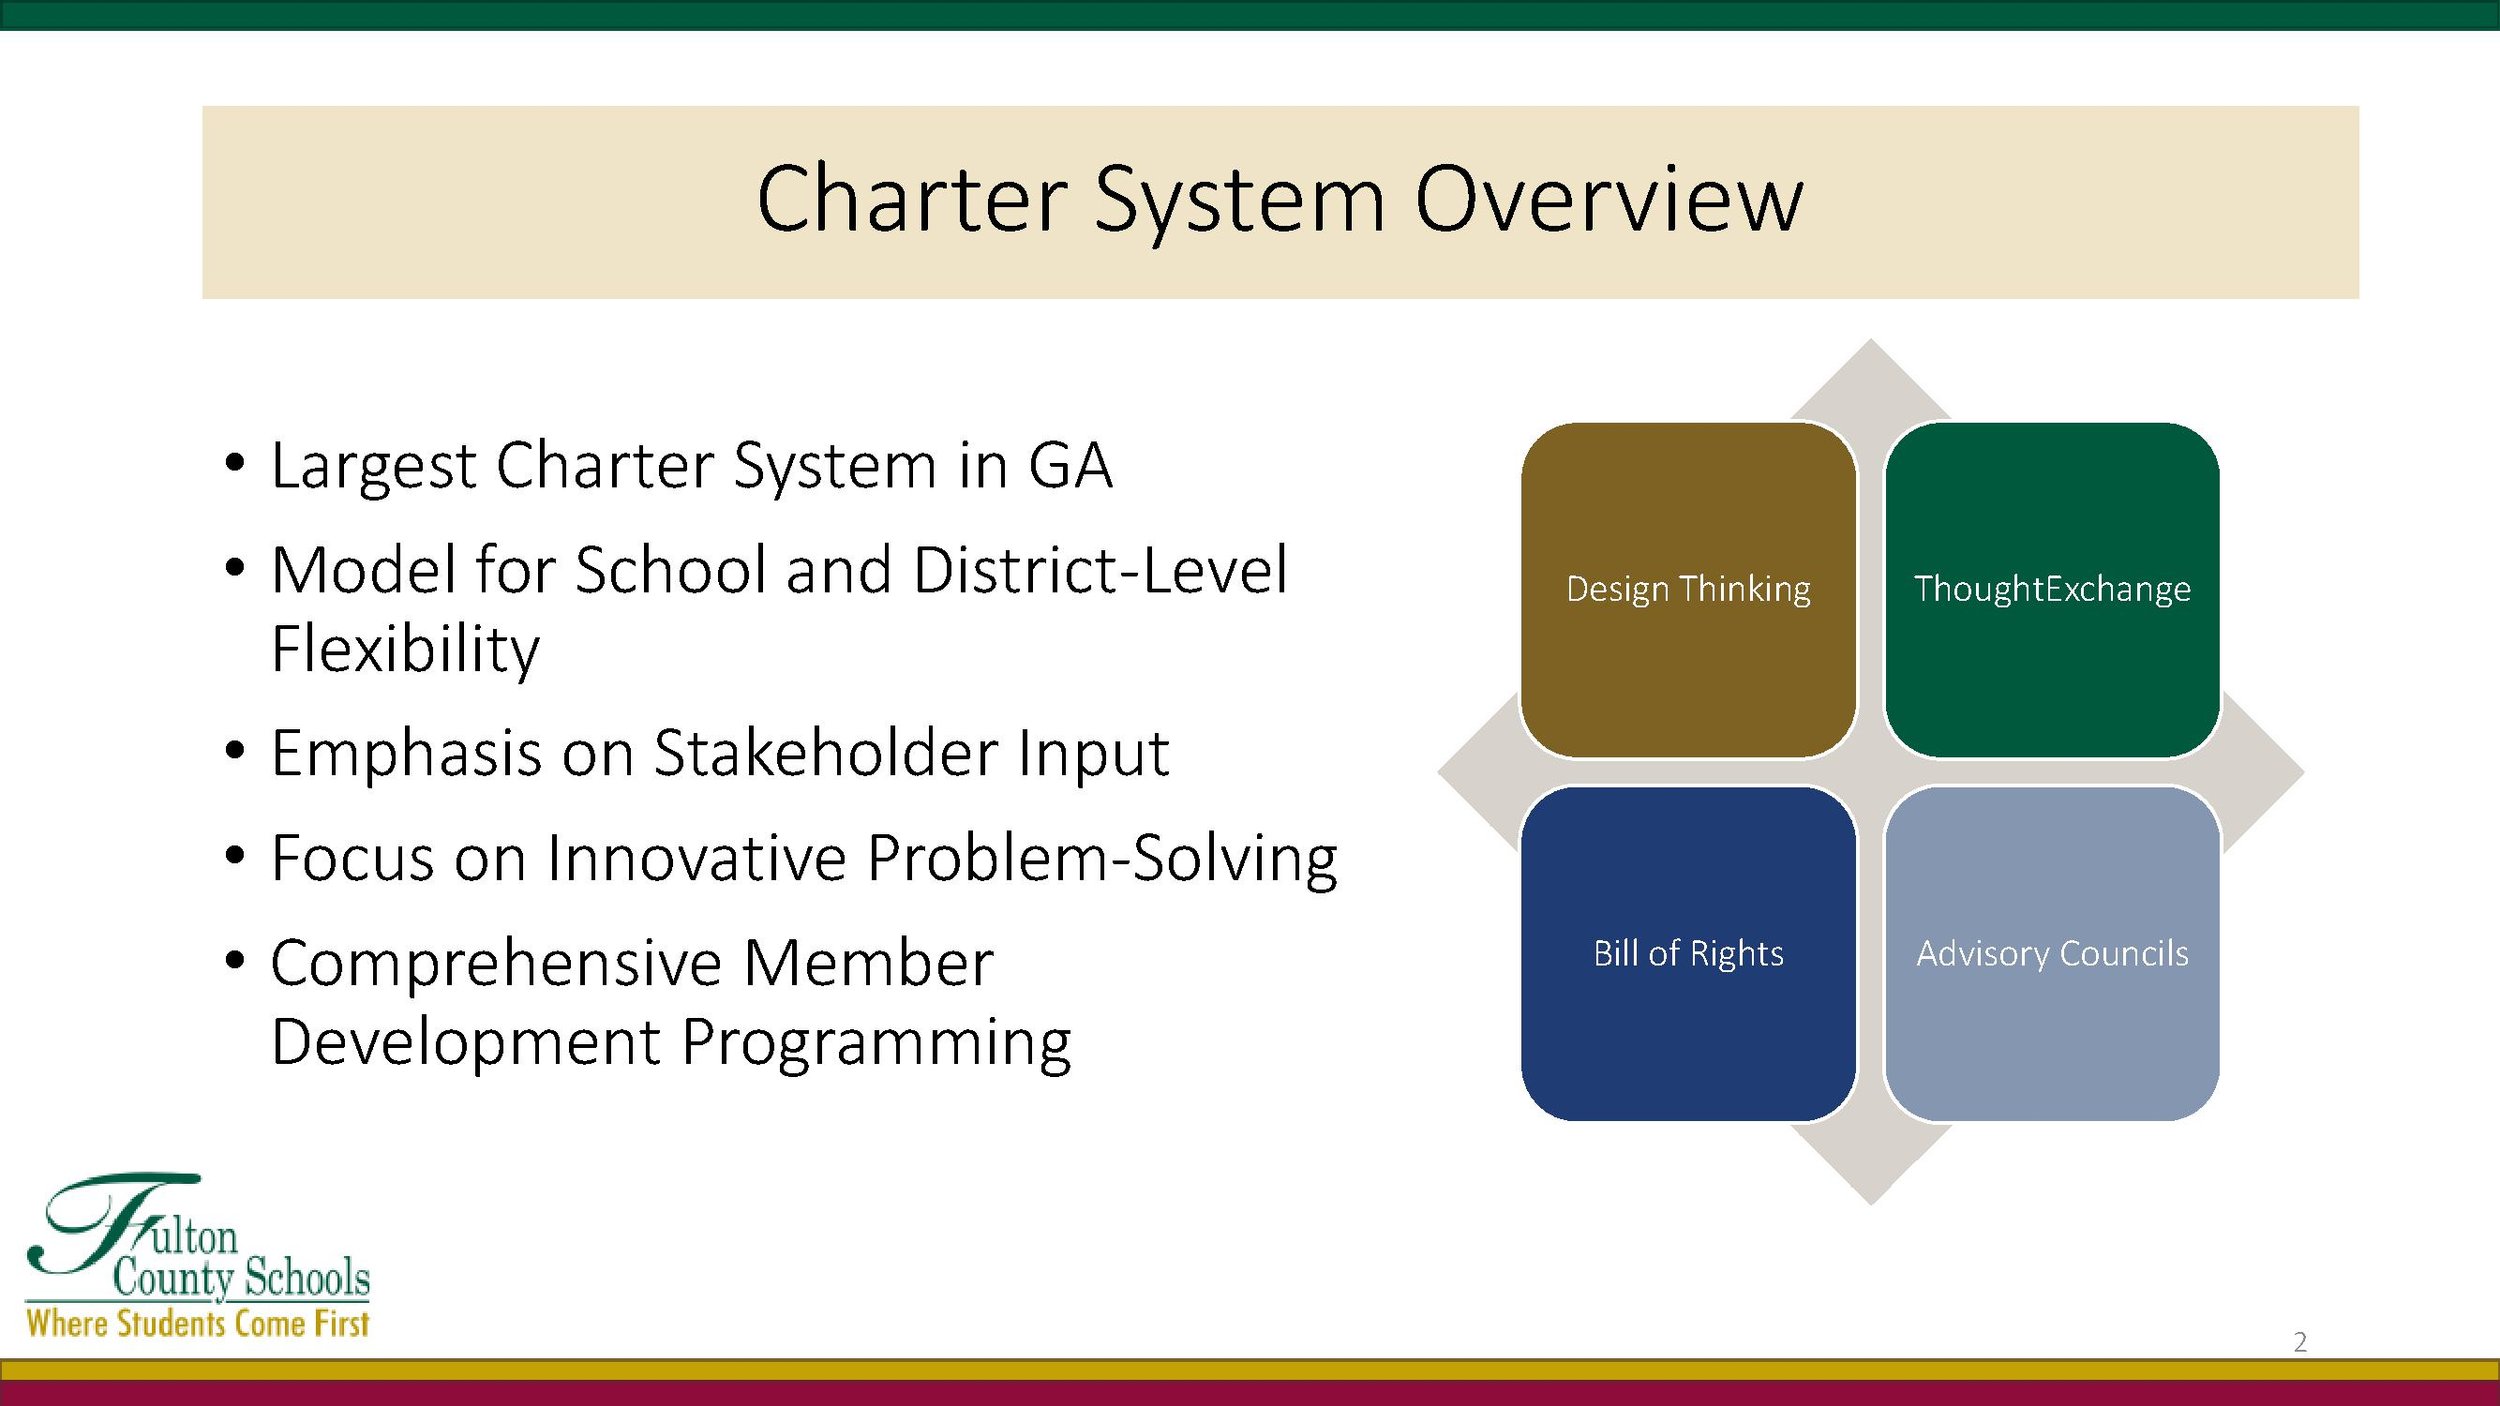 tinywow_State of the Charter System 2.0_44782411_2.jpg